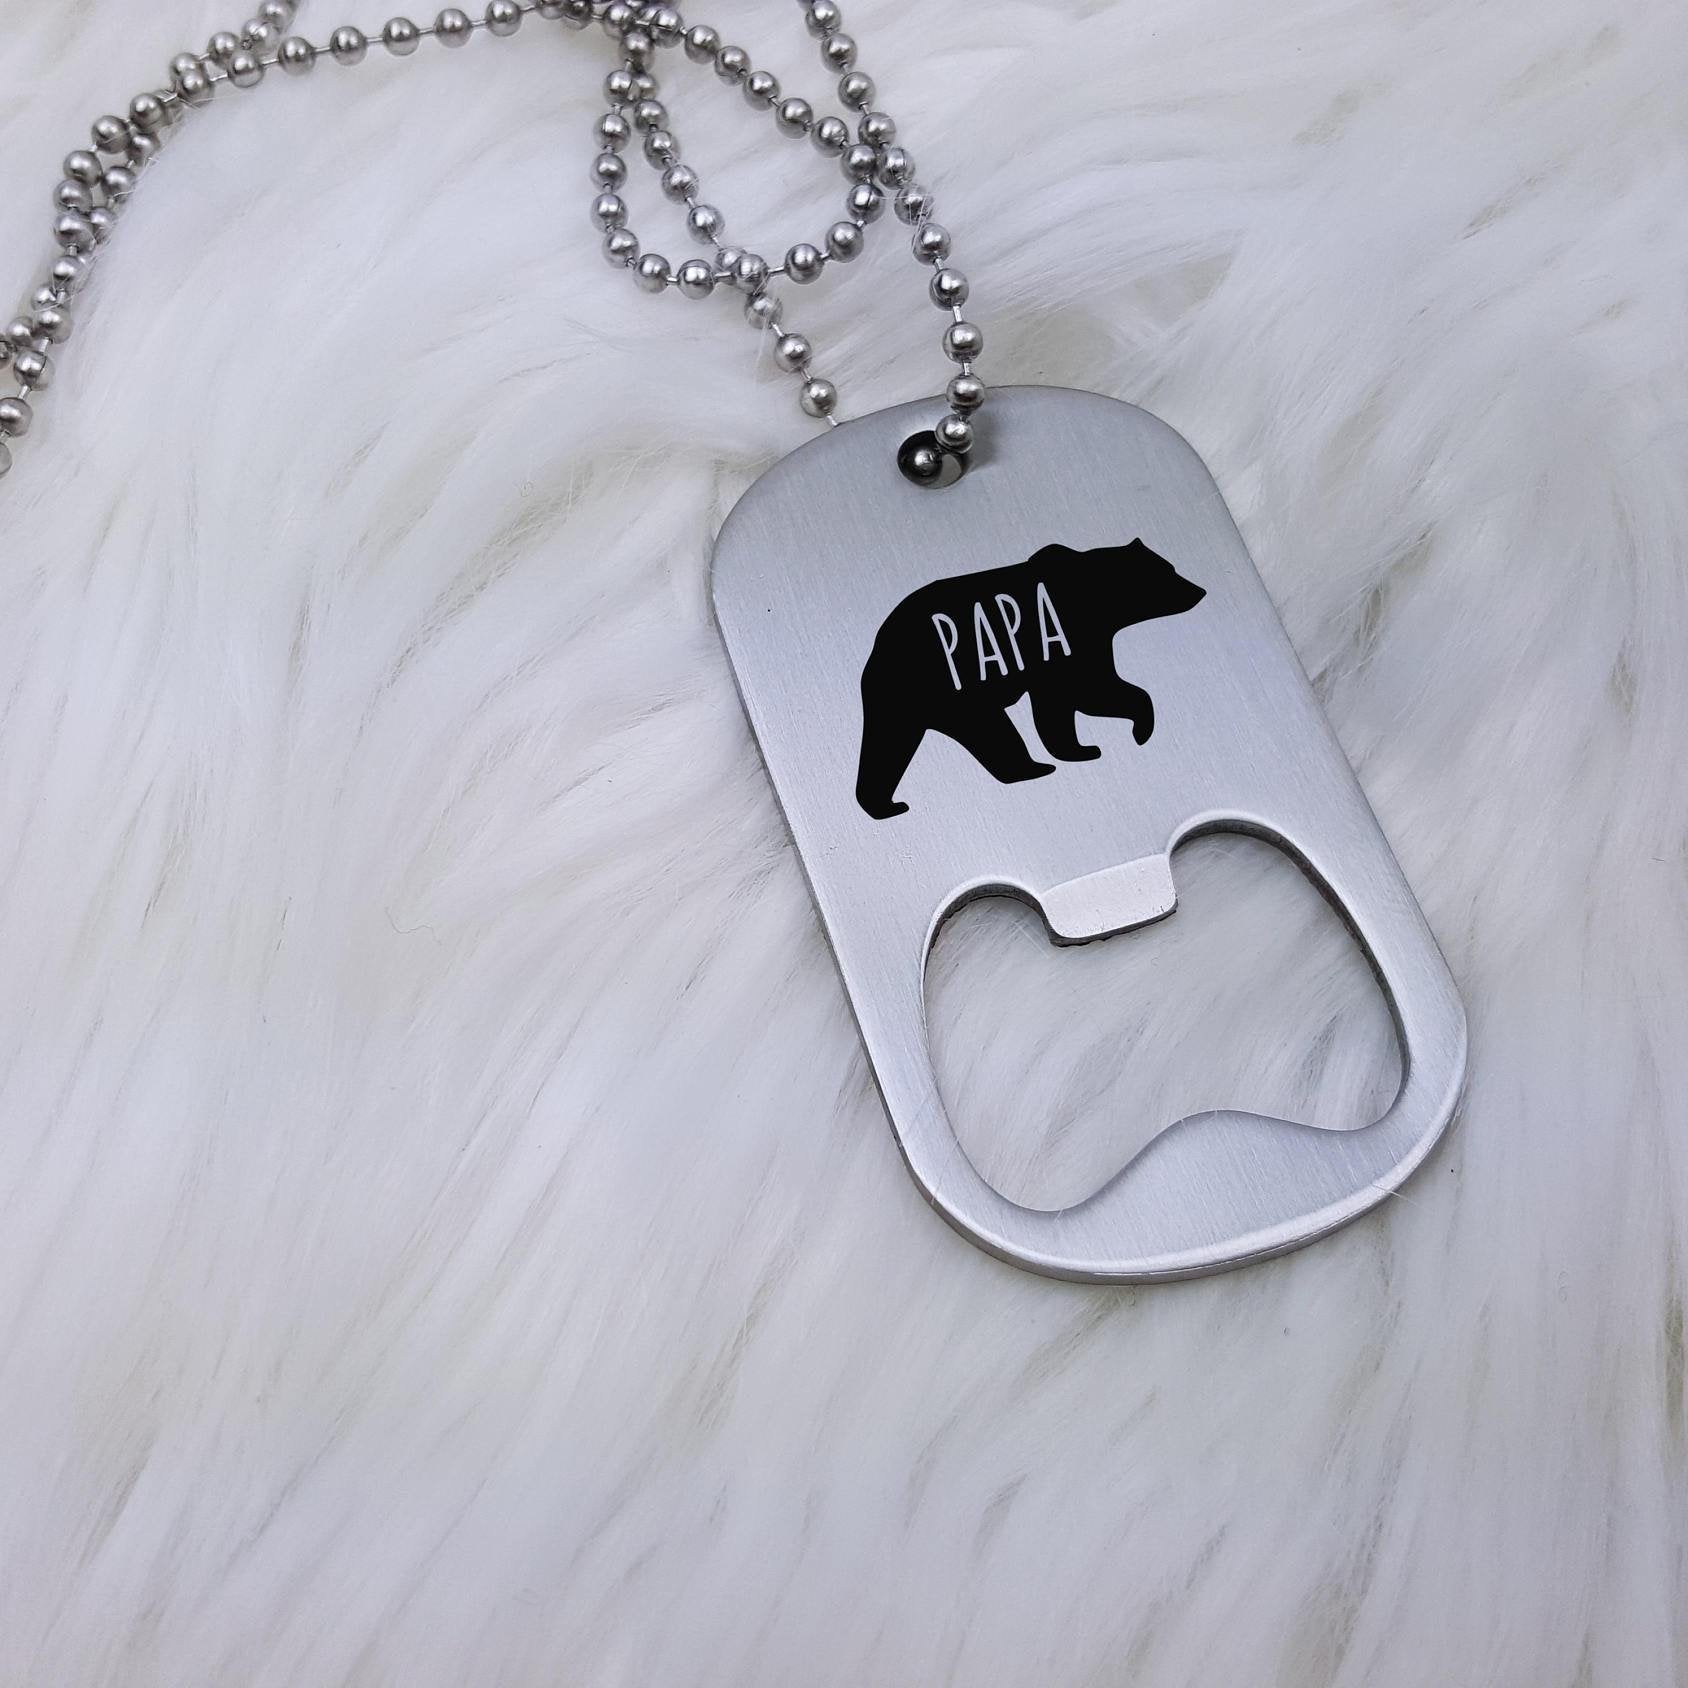 Men's Dog Tag, Gift For Him, Stainless Bottle Opener, Personalized Necklace, Custom Jewelry for Men, Papa Bear, For Dad, LGC10312